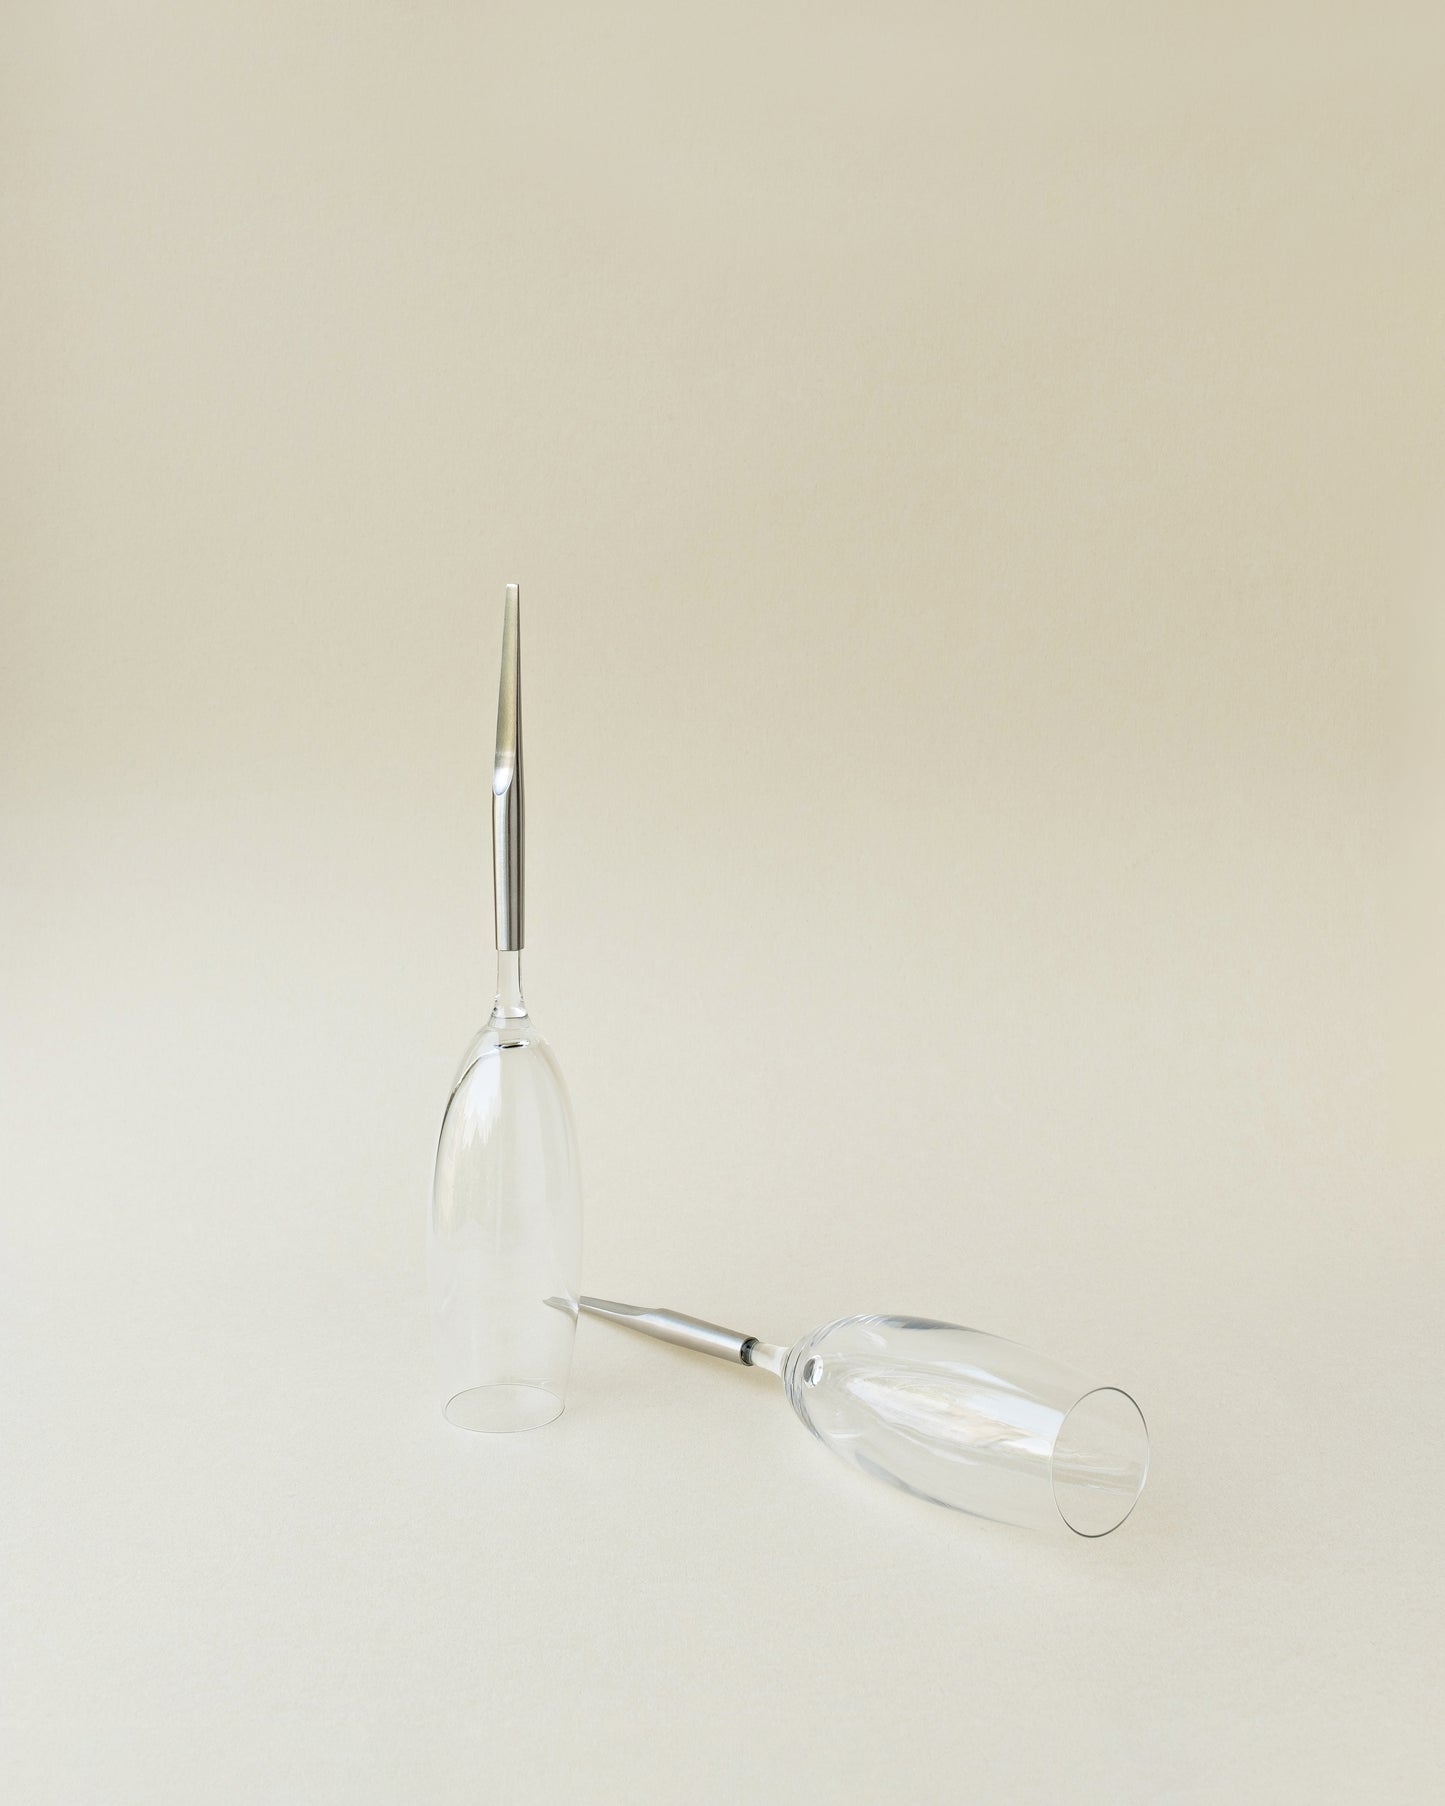 2 Crystal Champagne Glasses with metal Pin, one laying and one standing upside-down